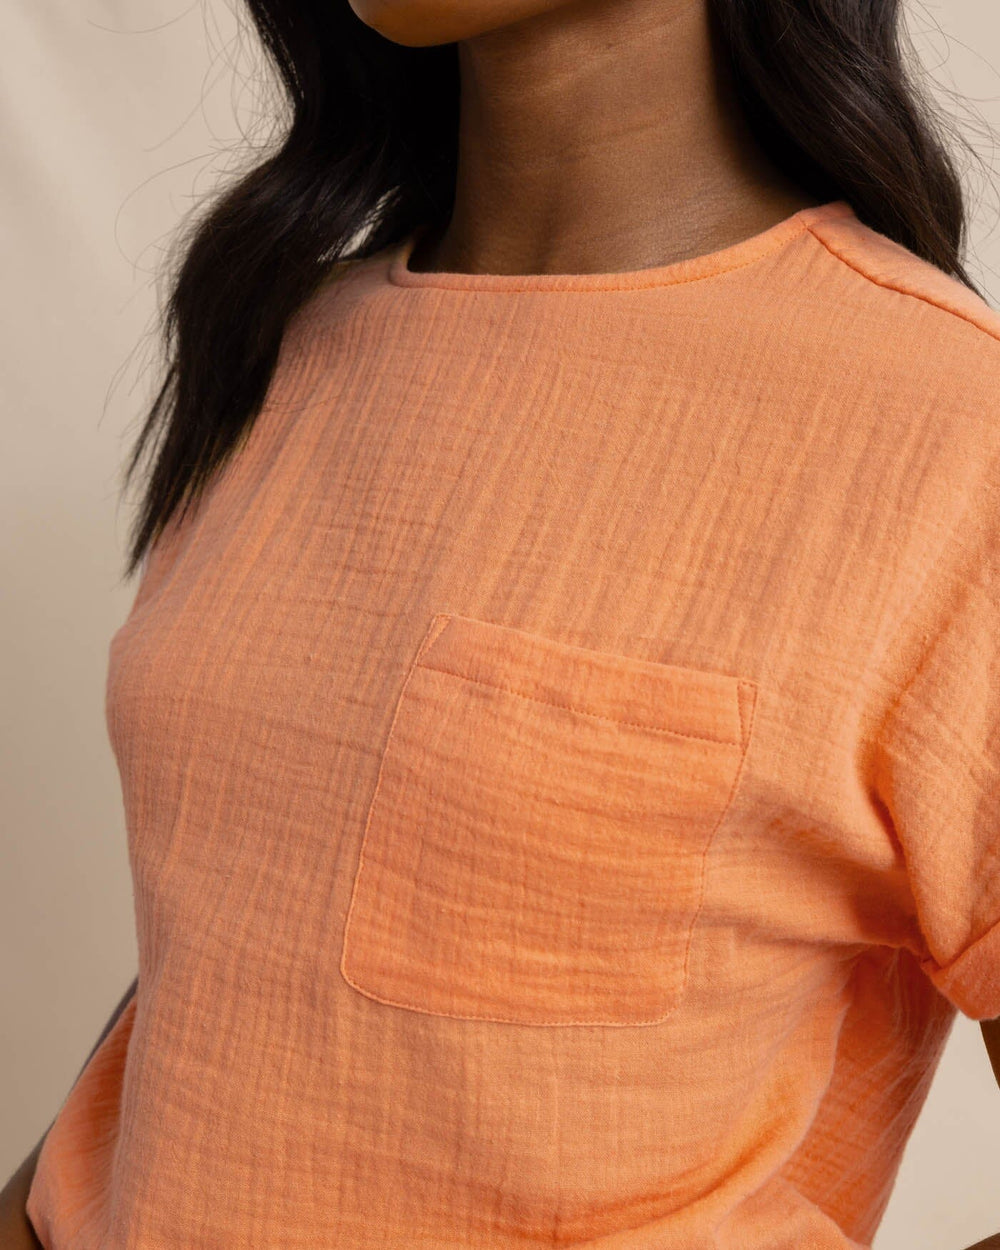 The detail view of the Southern Tide Imogen Double Cloth Top by Southern Tide - Peach Parfait